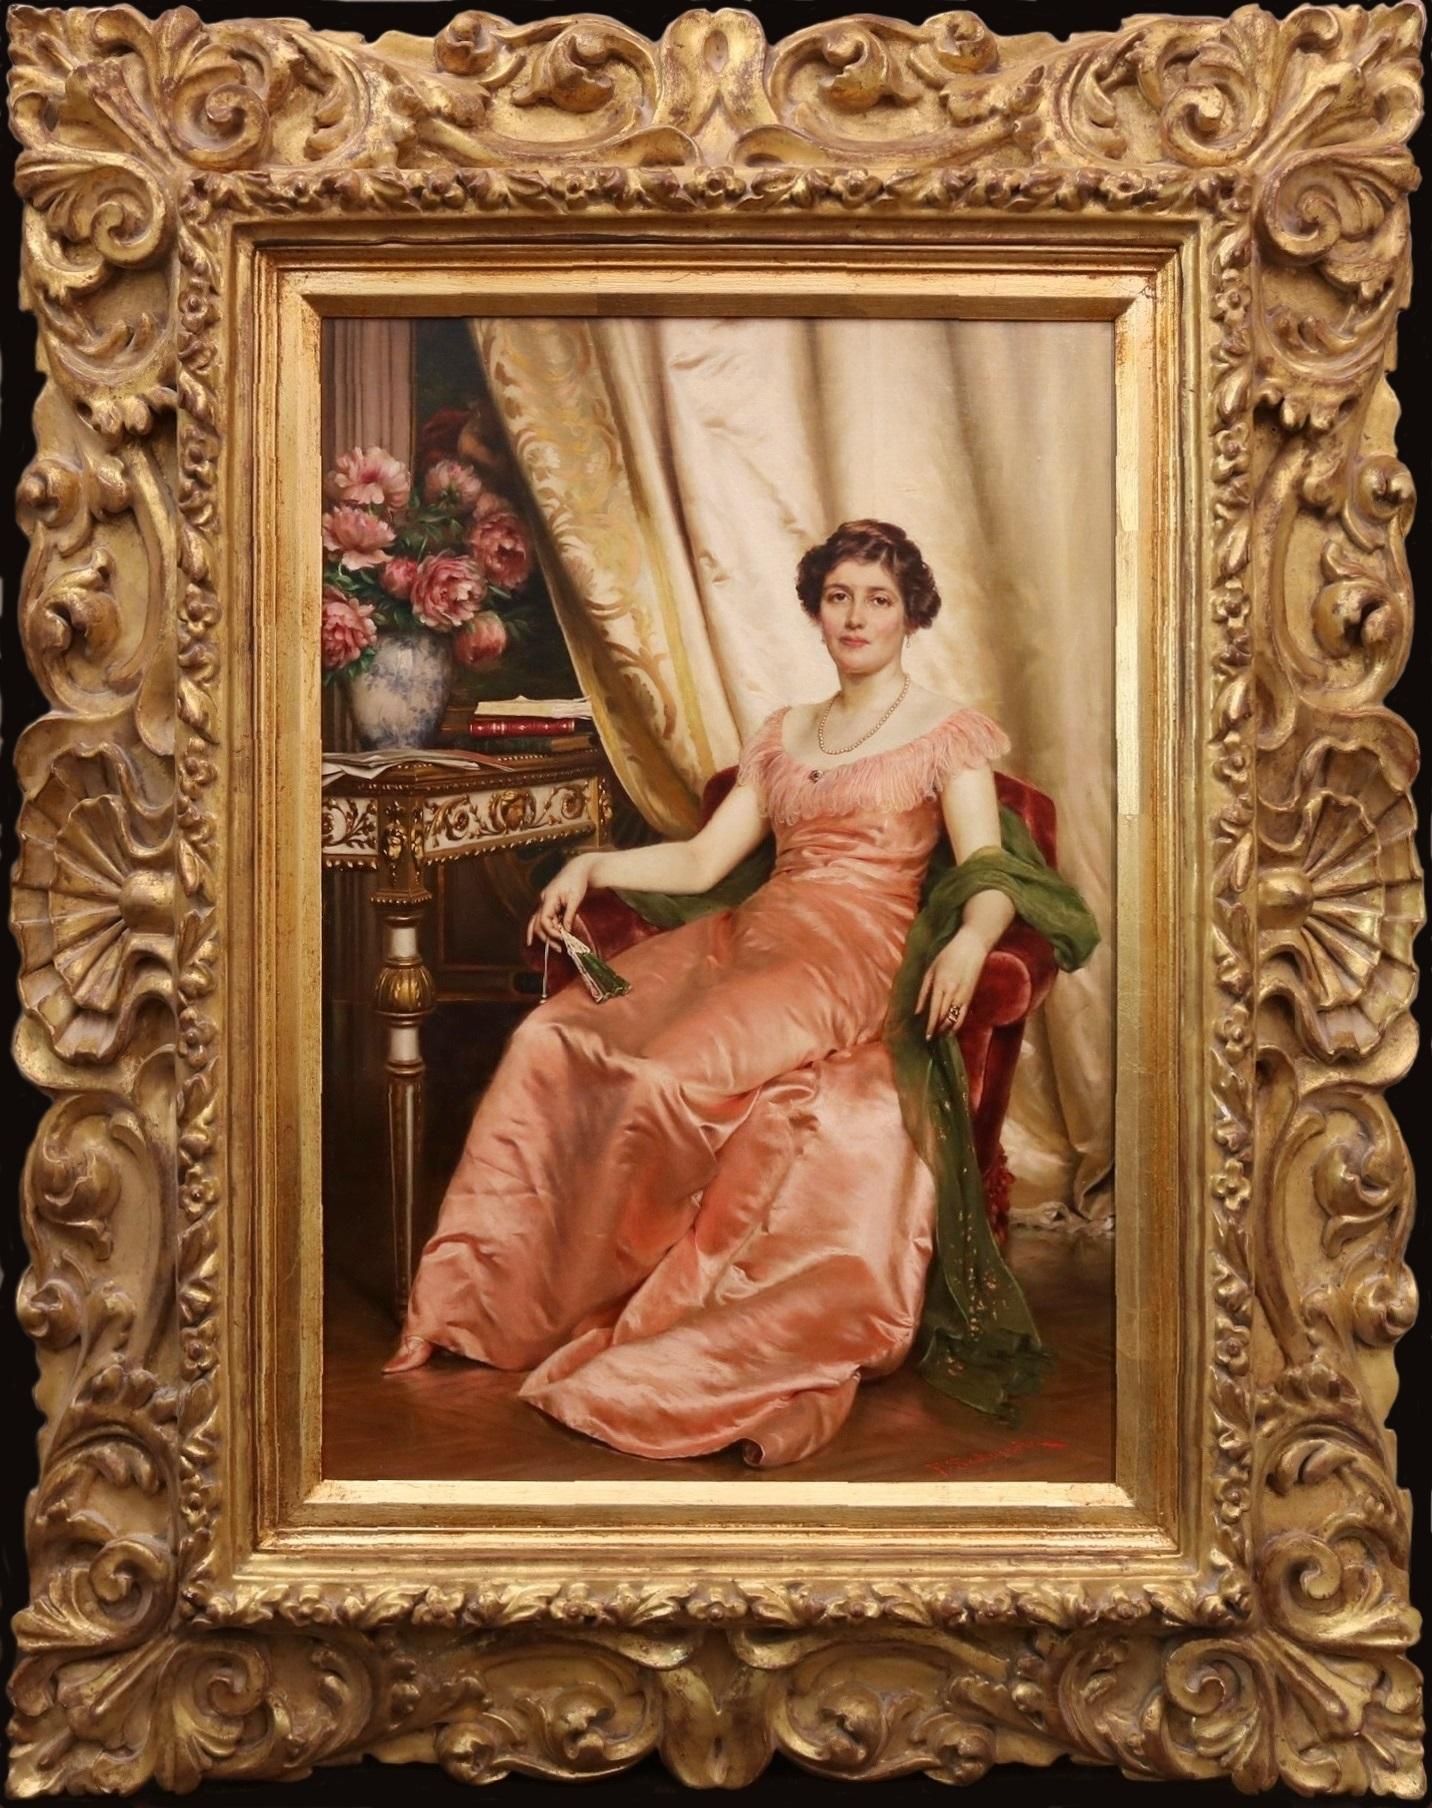 ‘Regina dei Fiori’ by Frédéric Soulacroix (1858-1933). 

The painting – which depicts an aristocratic Italian beauty sitting beside a porcelain vase full of peonies – is signed by the artist and presented in a superb quality hand-carved giltwood